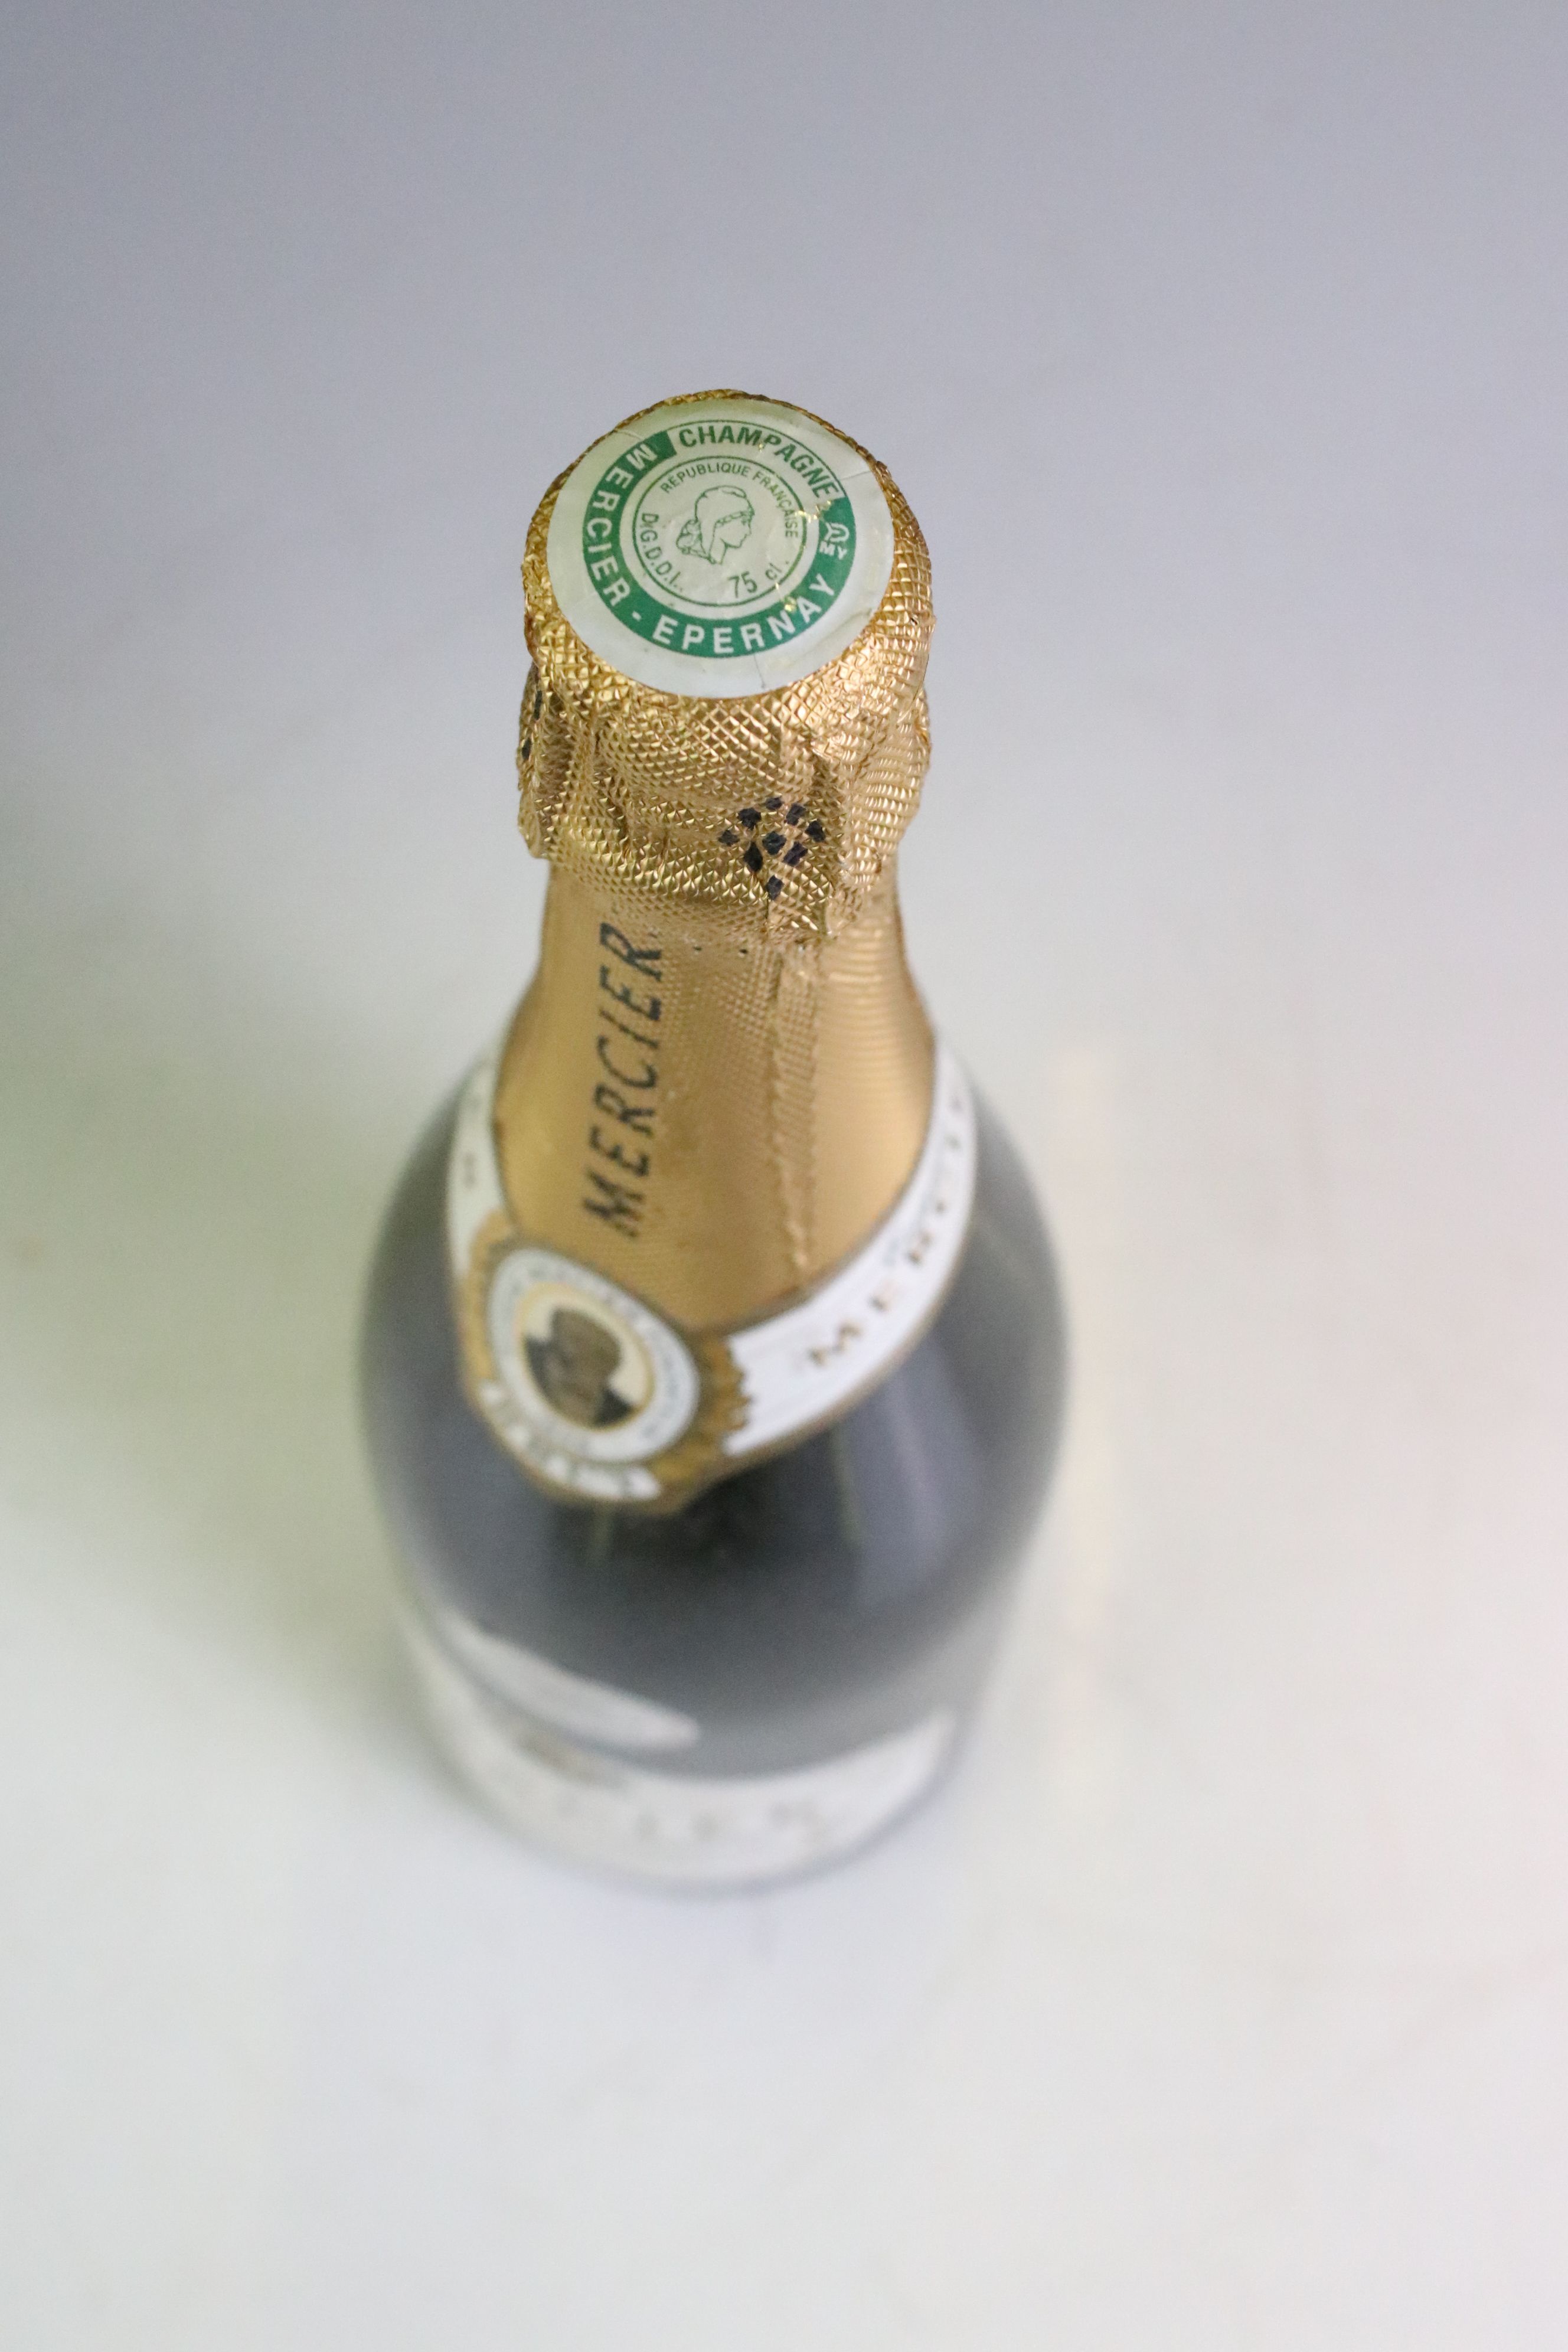 A collection of three bottles of Champagne to include Mercier Brut, Mumm Cordon Vert and Drappier - Image 10 of 10